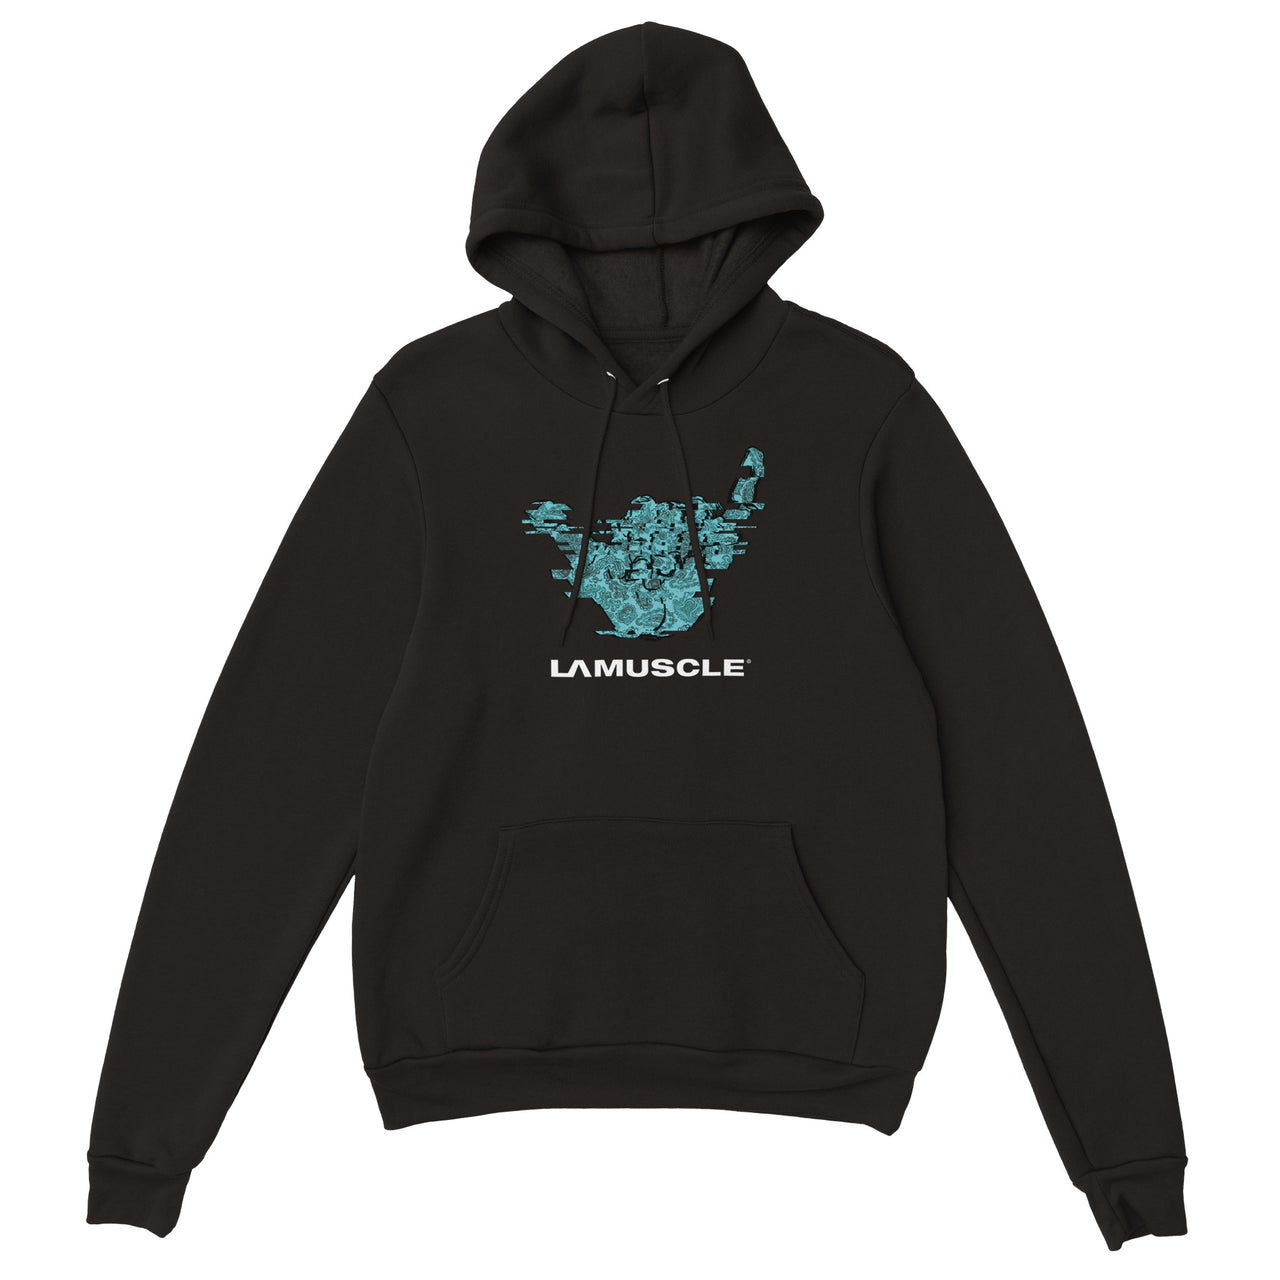 SURF'S UP by LA Muscle Premium Unisex Pullover Hoodie